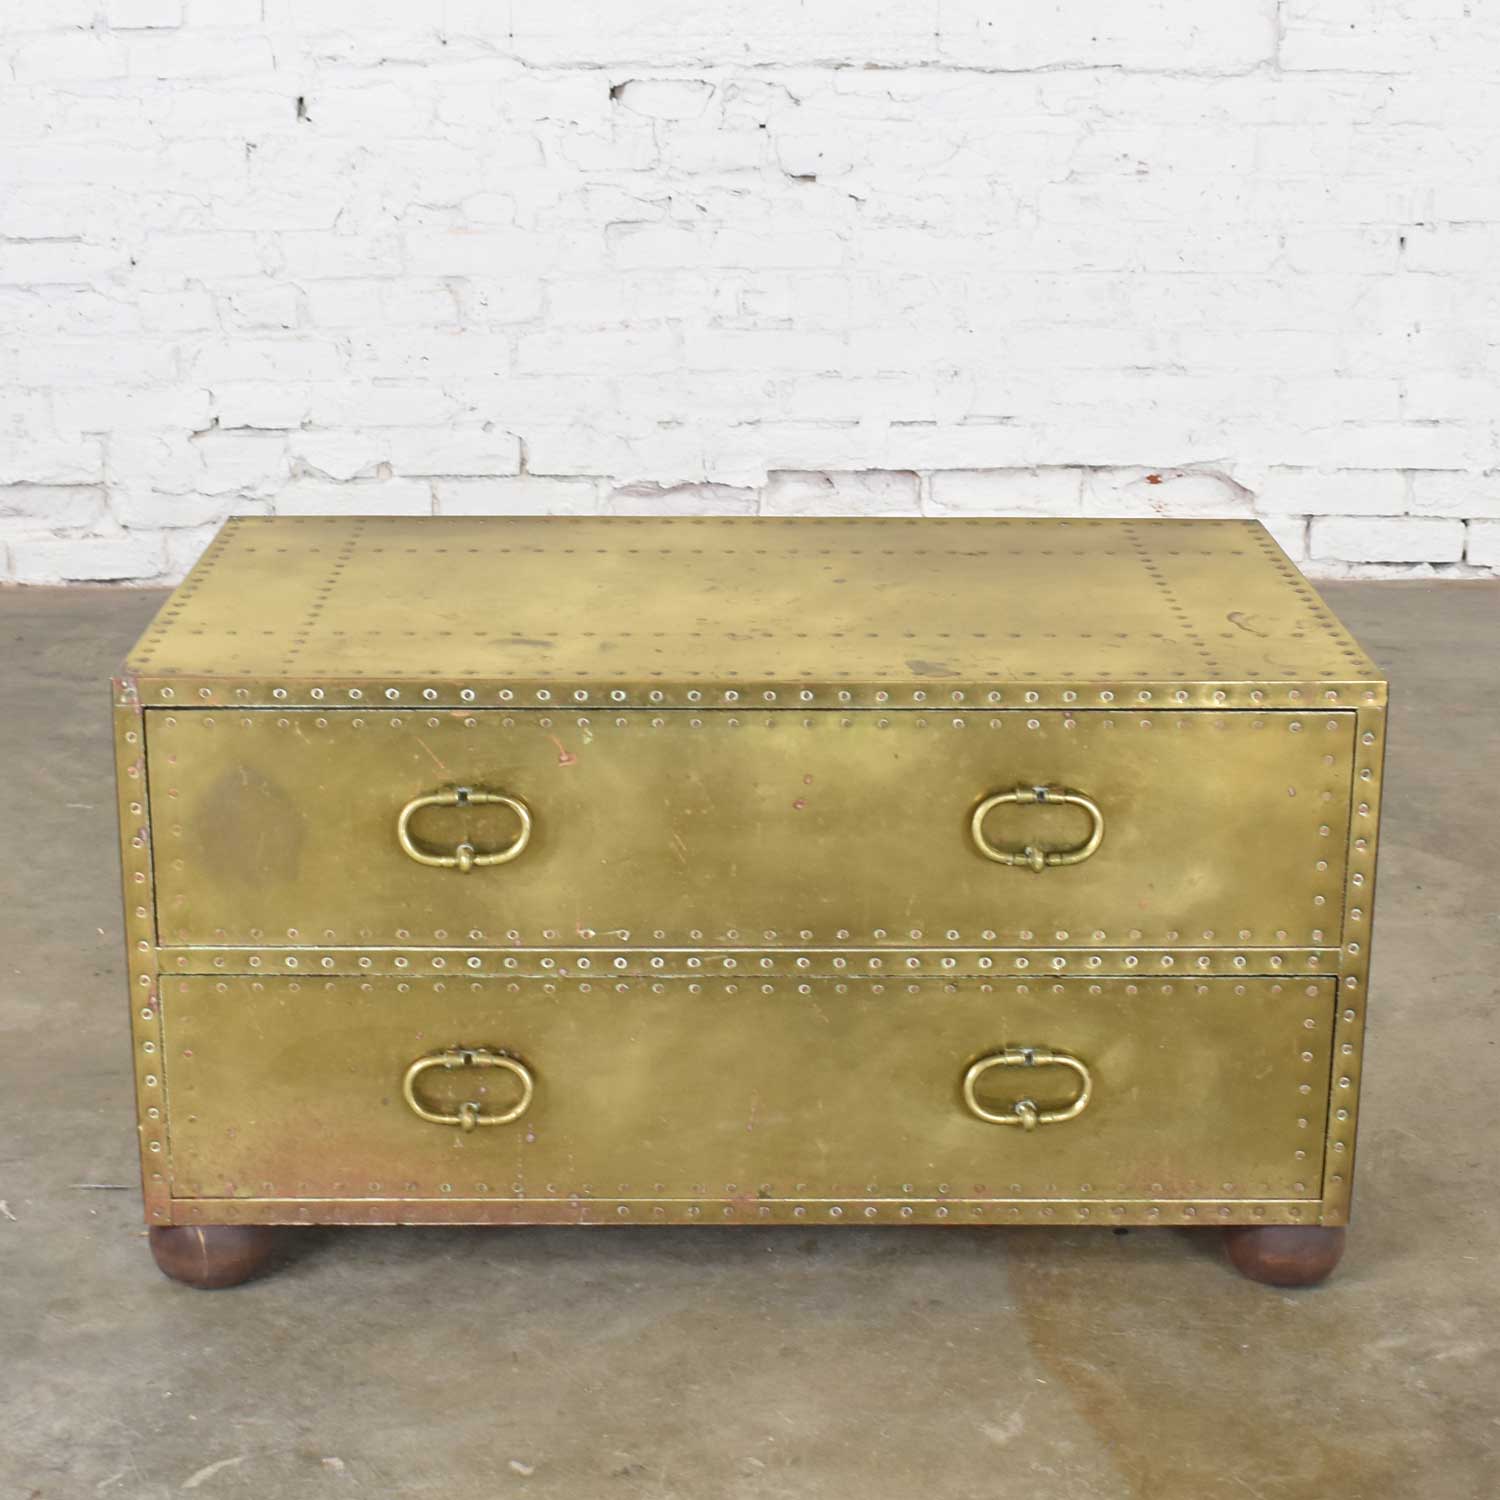 Hollywood Regency Campaign Style Brass Clad Two Drawer Chest by Sarreid Ltd. Spain